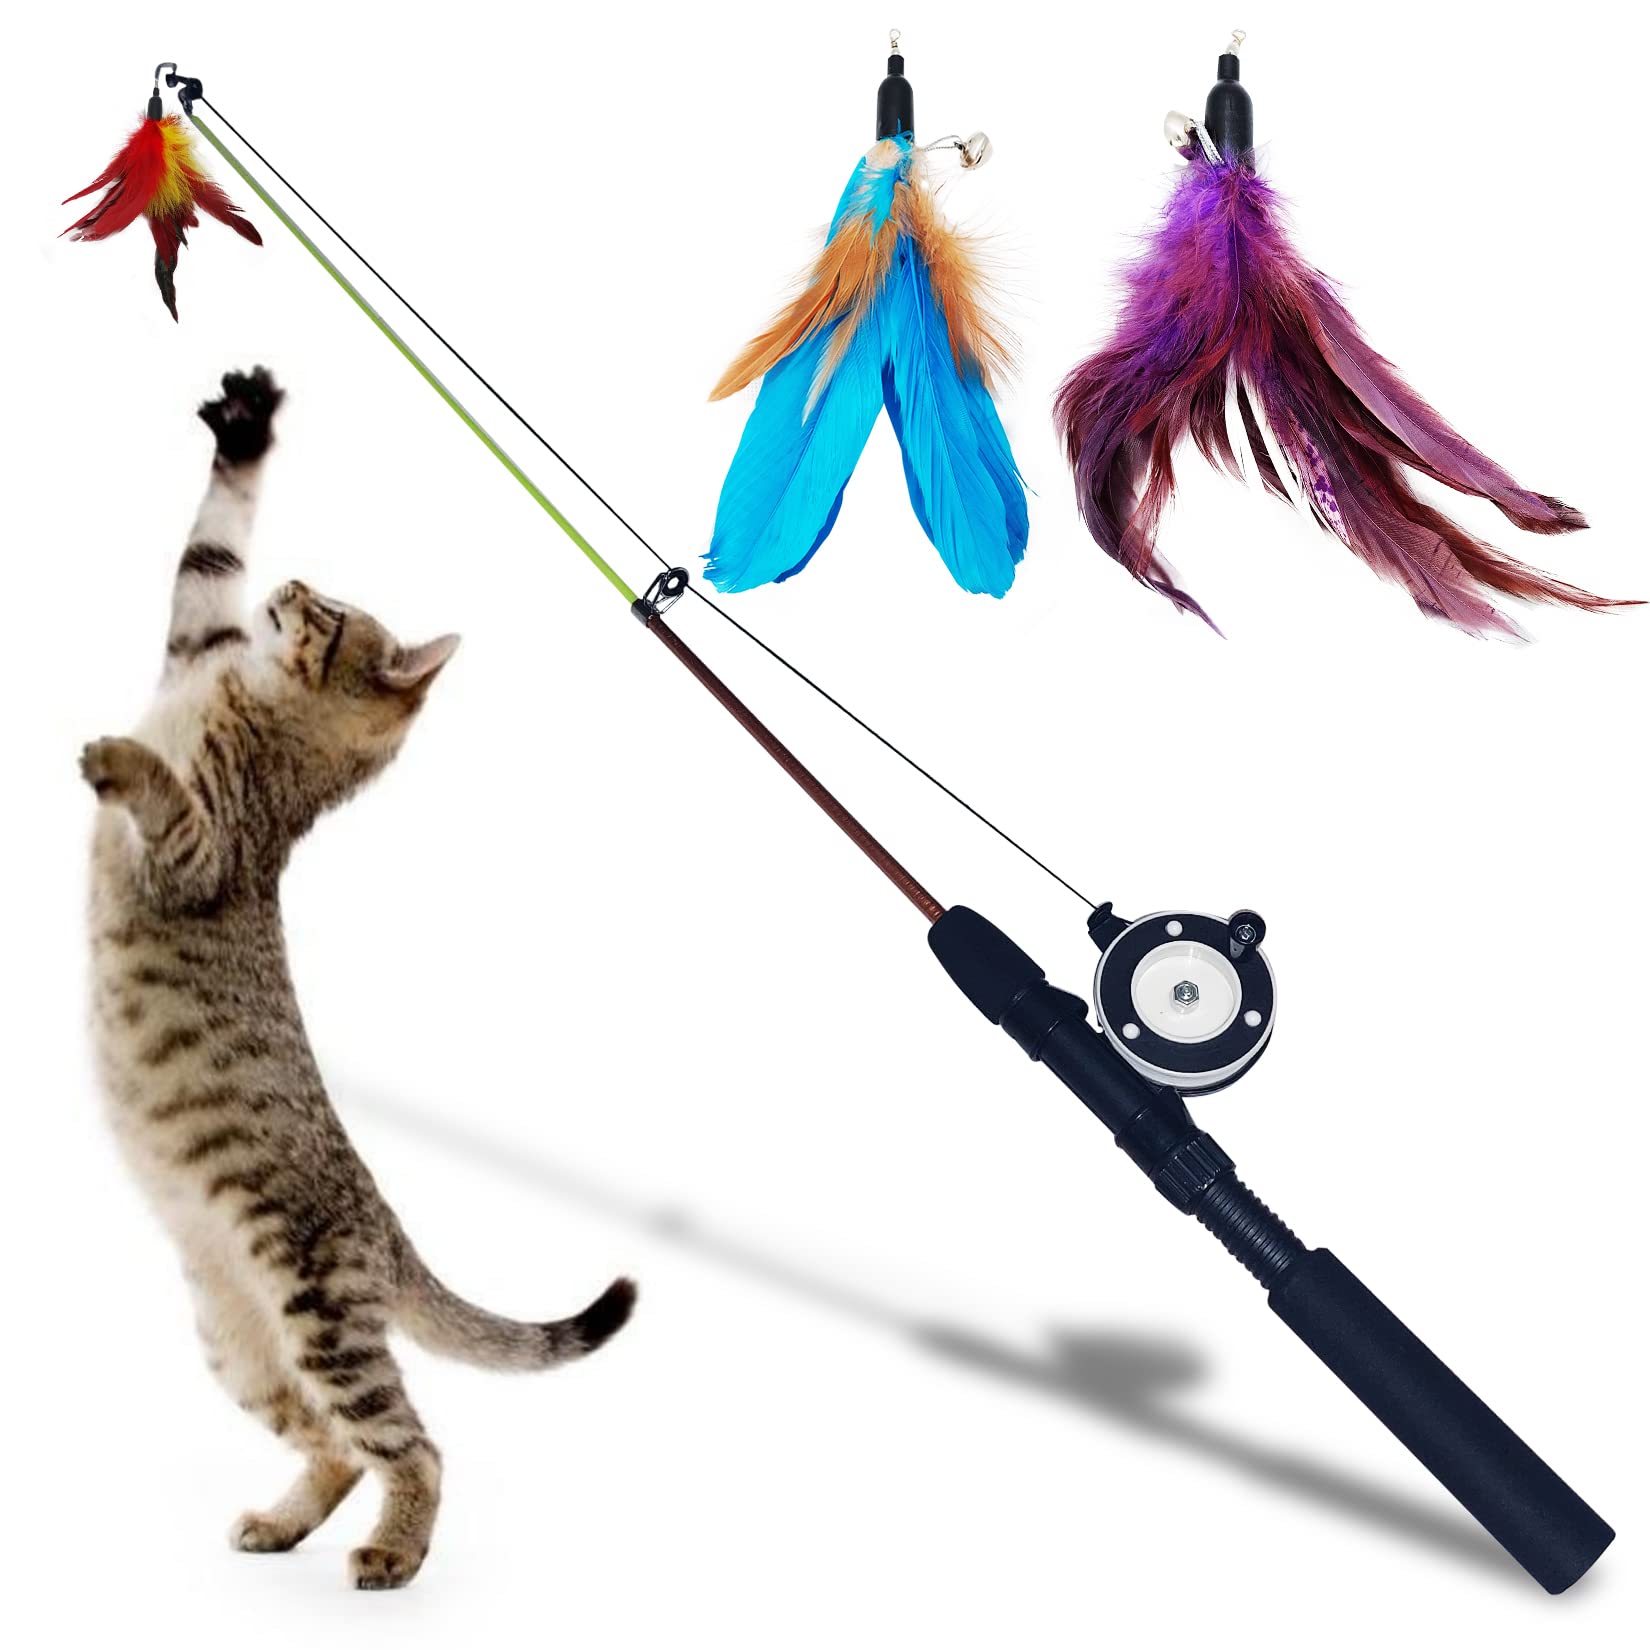 Premium Photo  A small gray kitten plays with toy on a fishing rod cat toys